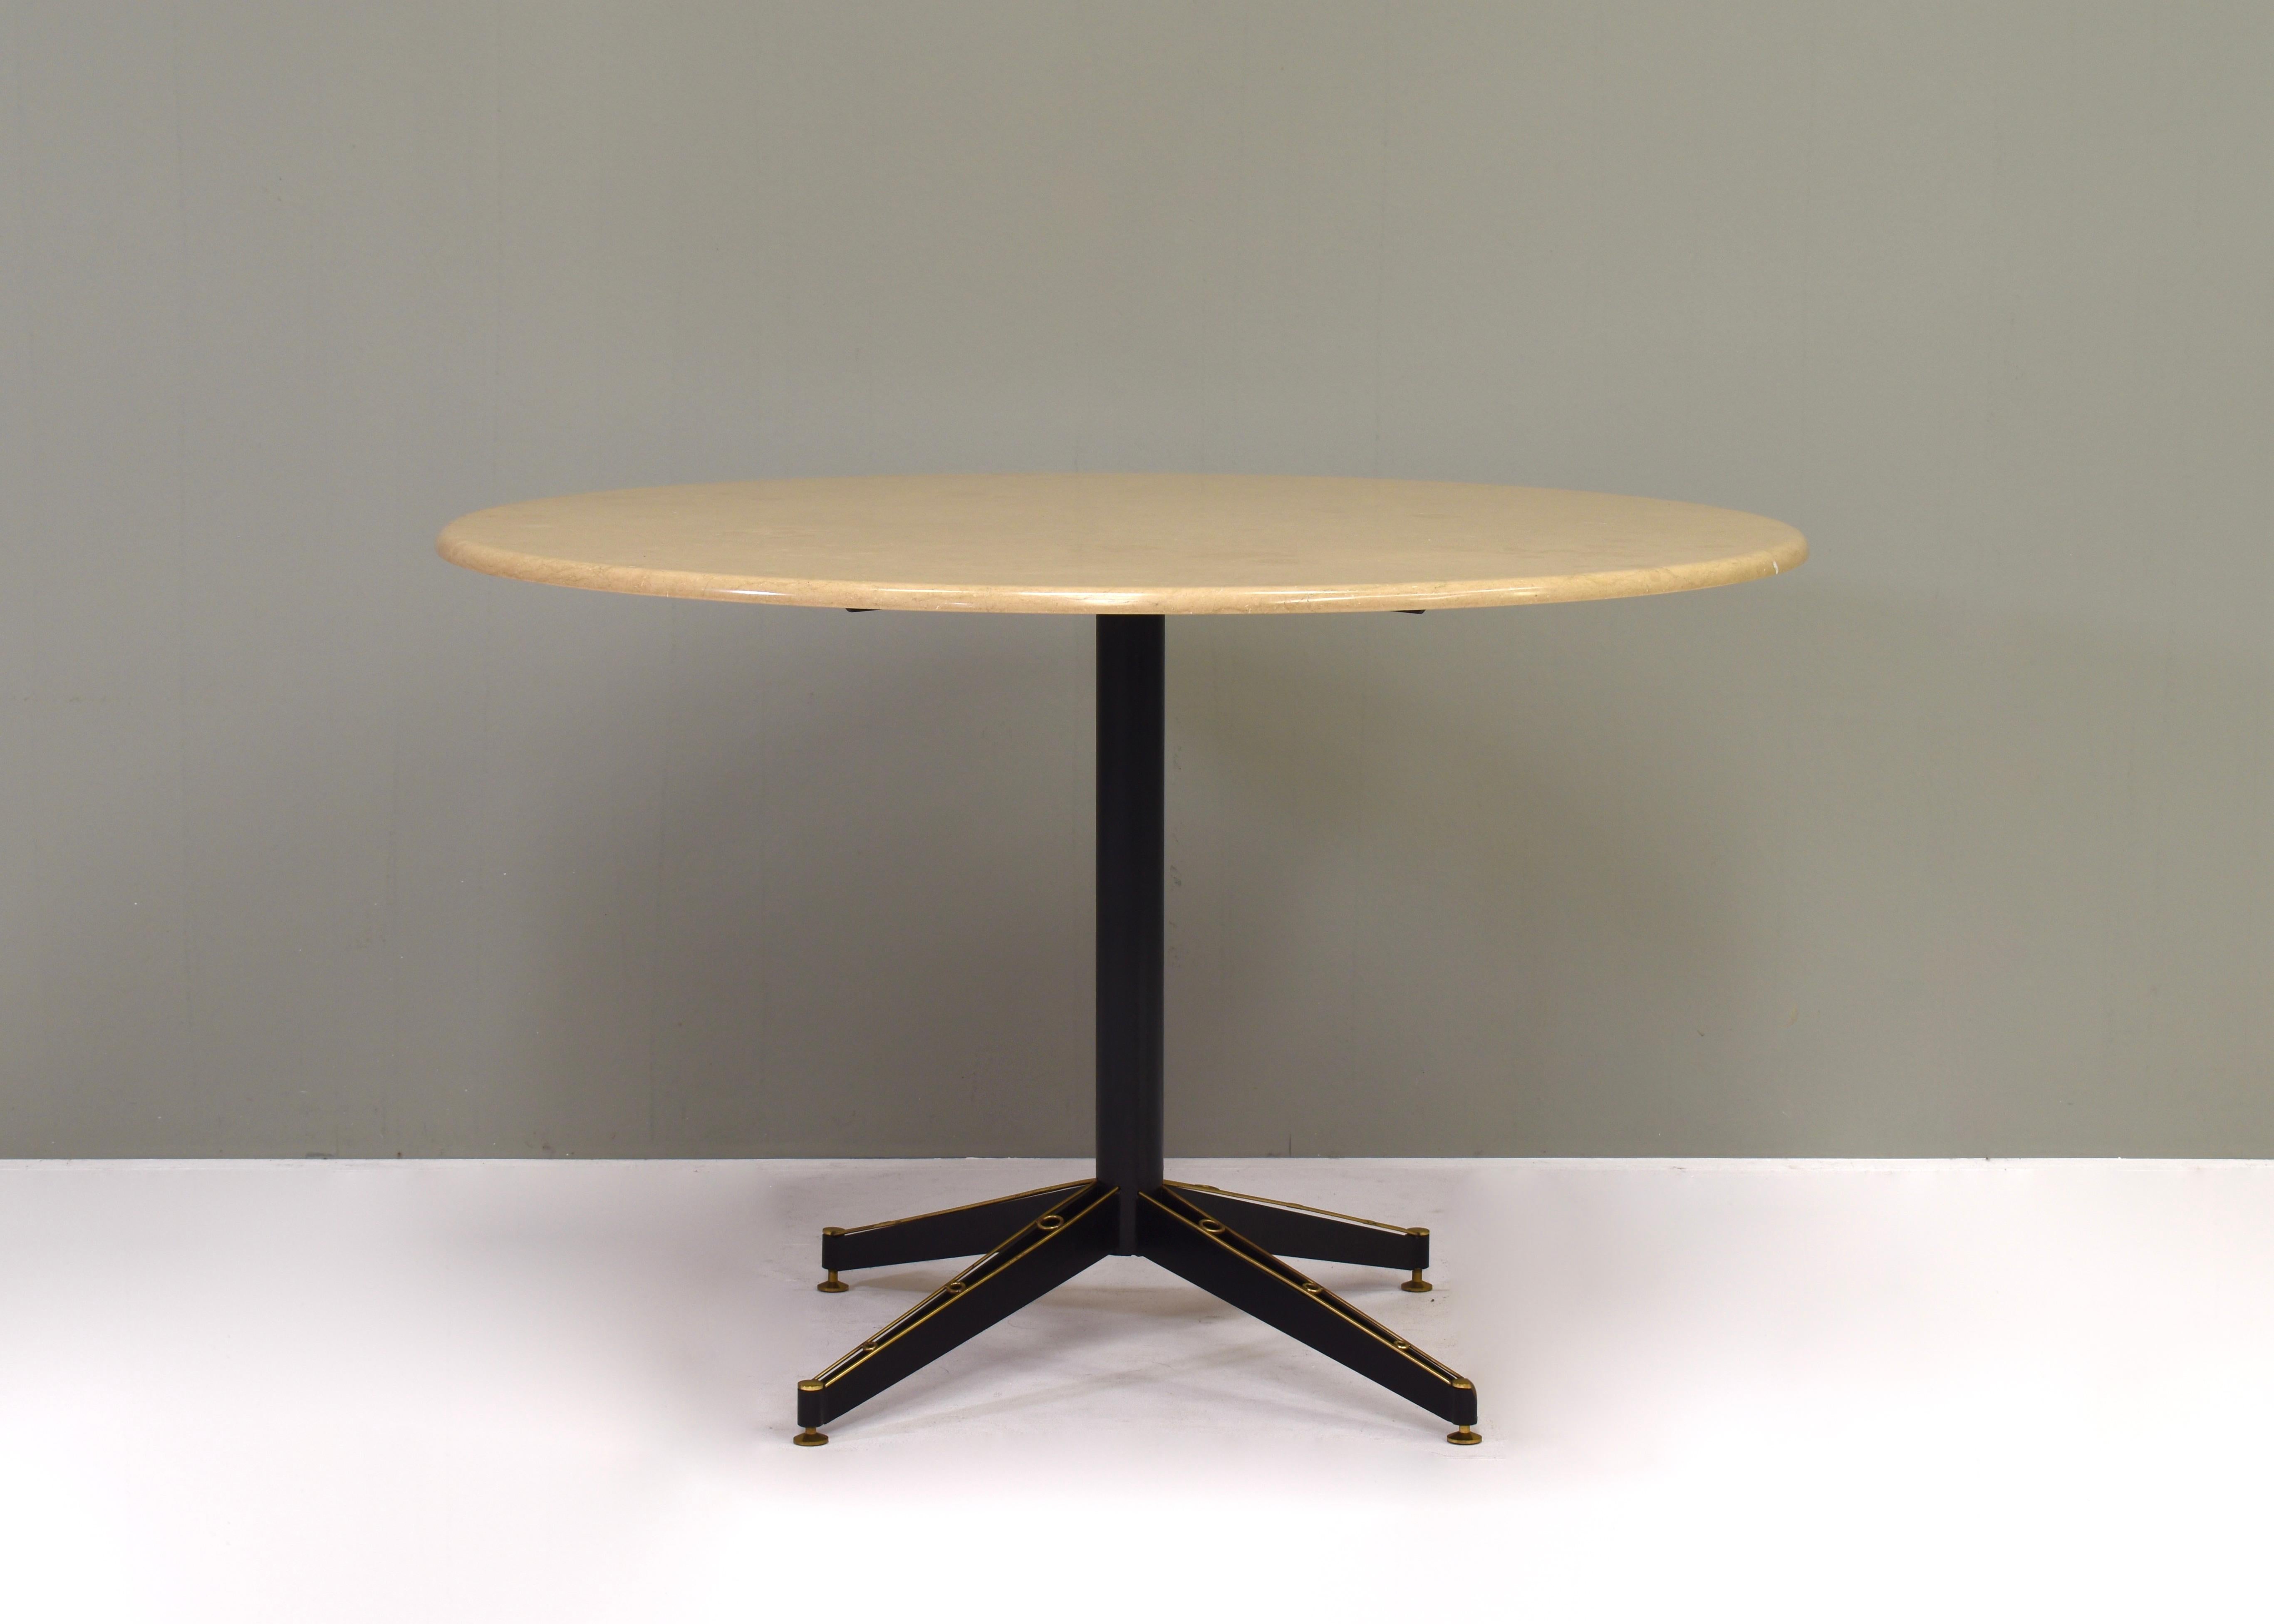 Italian dining table with marble top, metal base and amazing hand crafted brass details – Italy, circa 1950.
In very good condition.
Designer: Unknown
Manufacturer: Unknown
Country: Italy
Model: round dining table
Design period: circa 1950
Date of